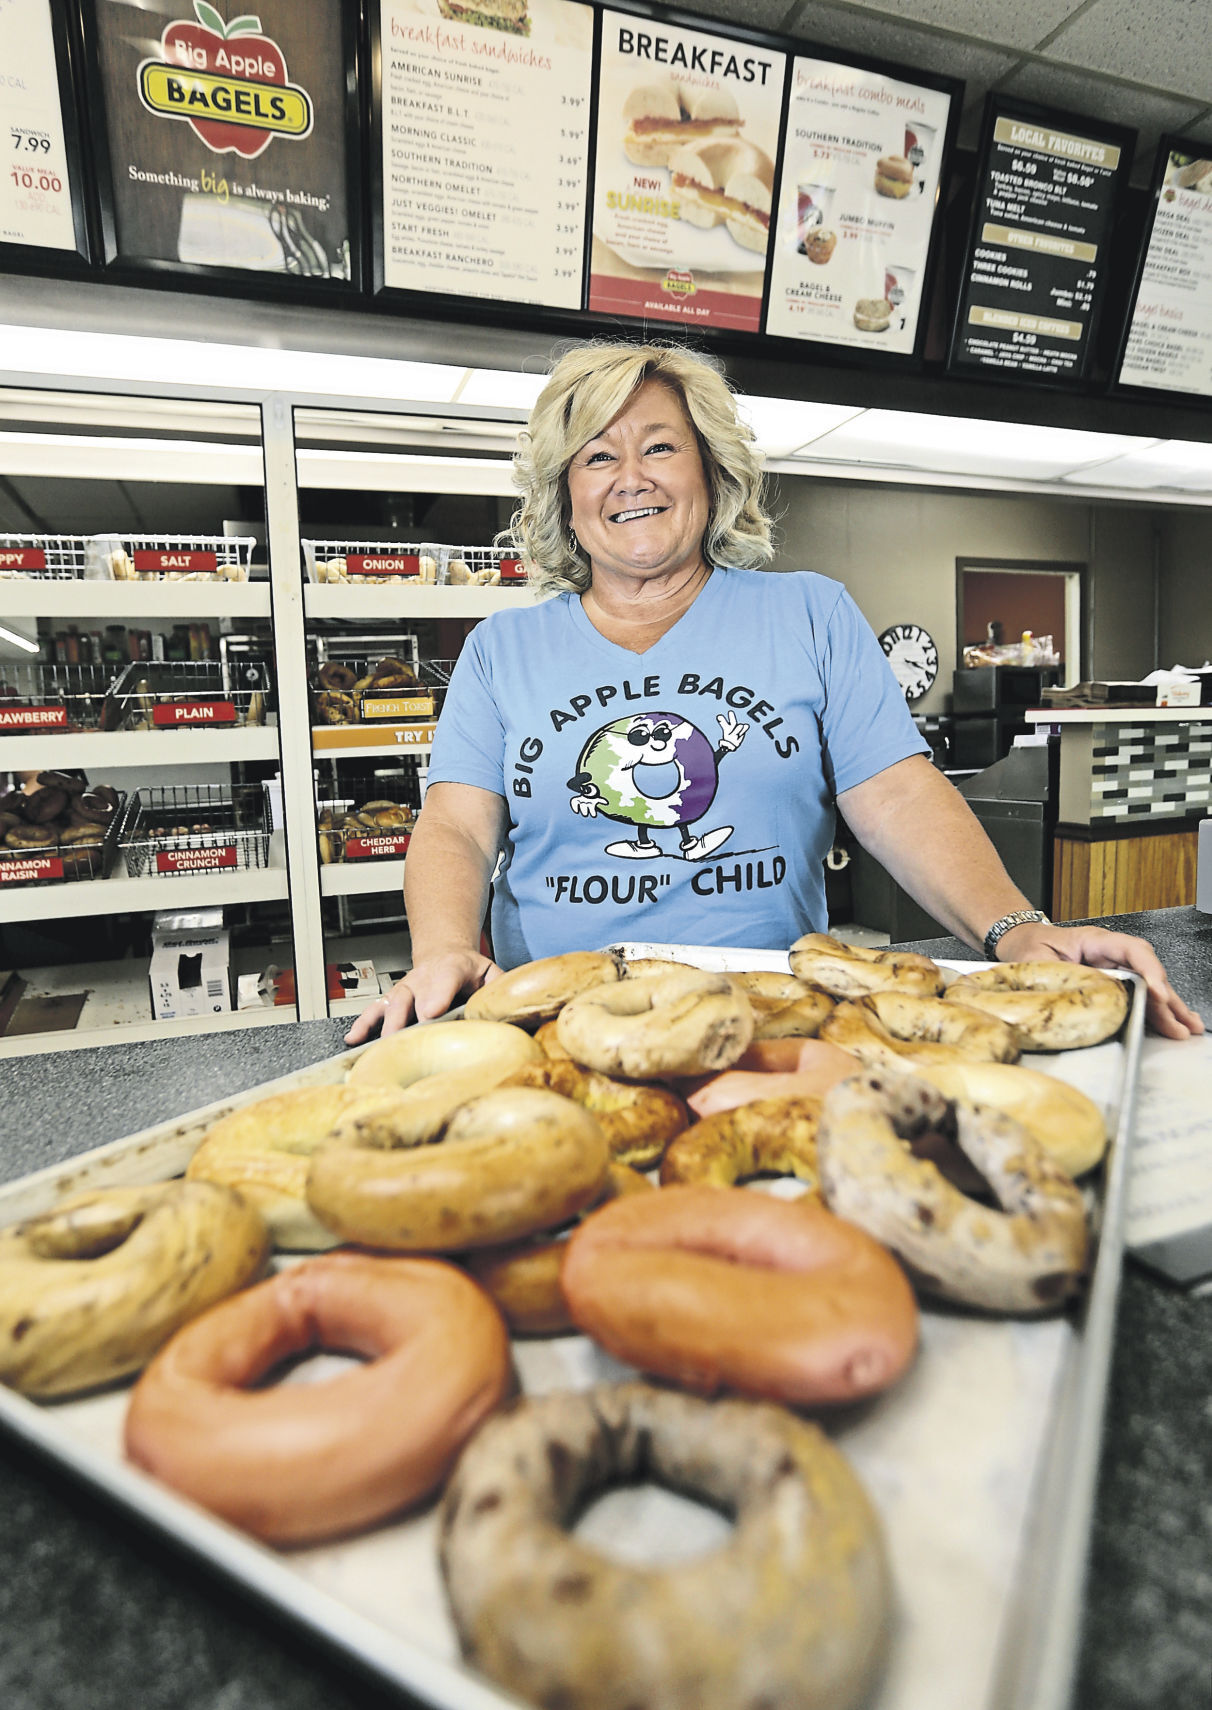 Faulhaber has owned Big Apple Bagels for more than 20 years.    PHOTO CREDIT: Jessica Reilly